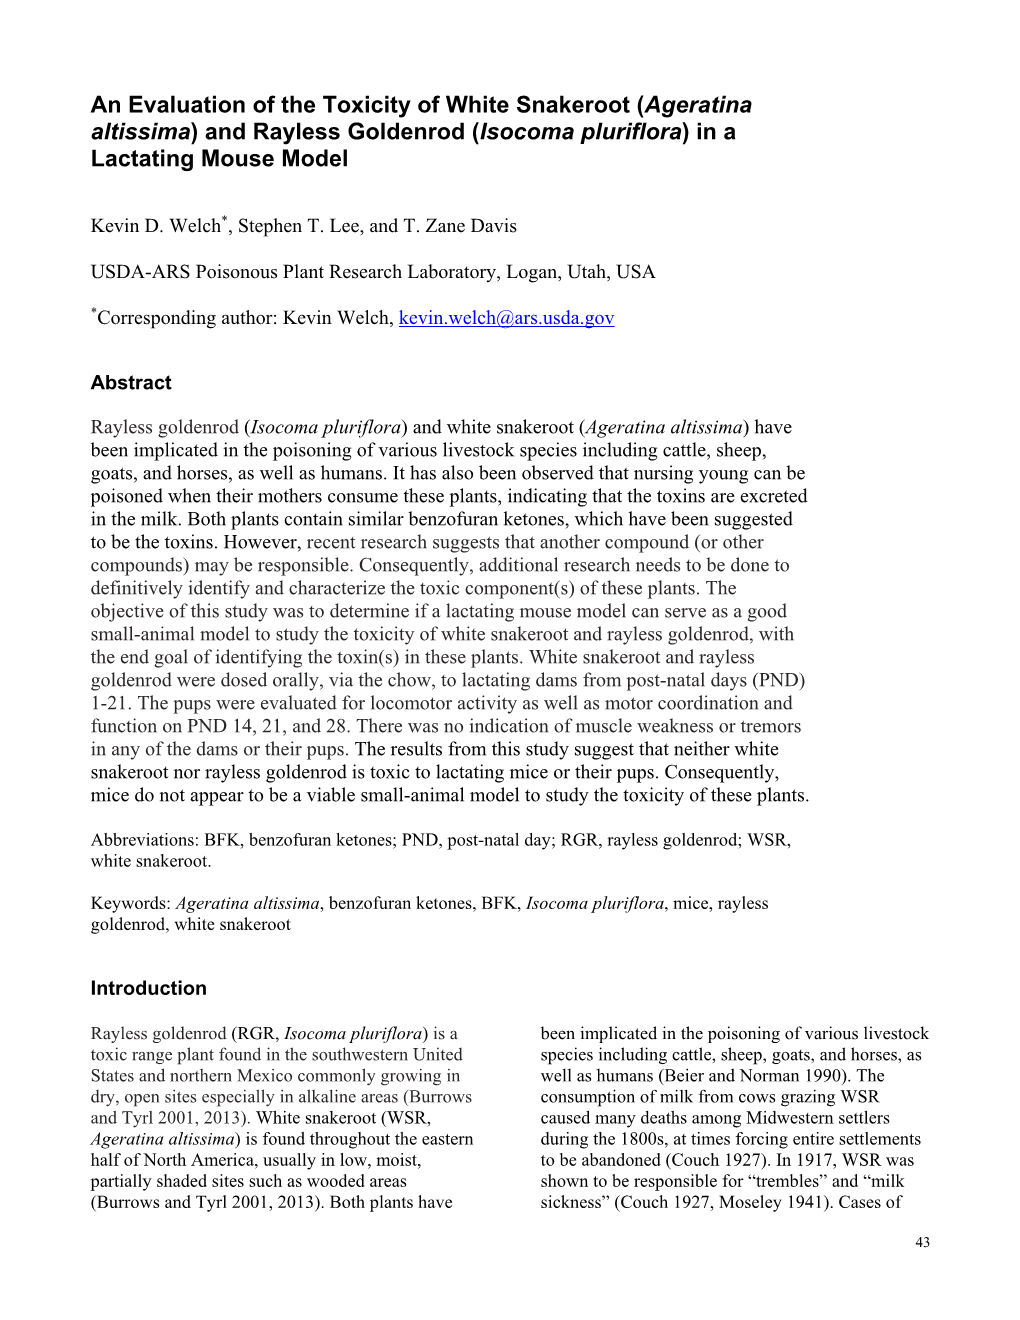 An Evaluation of the Toxicity of White Snakeroot (Ageratina Altissima) and Rayless Goldenrod (Isocoma Pluriflora) in a Lactating Mouse Model